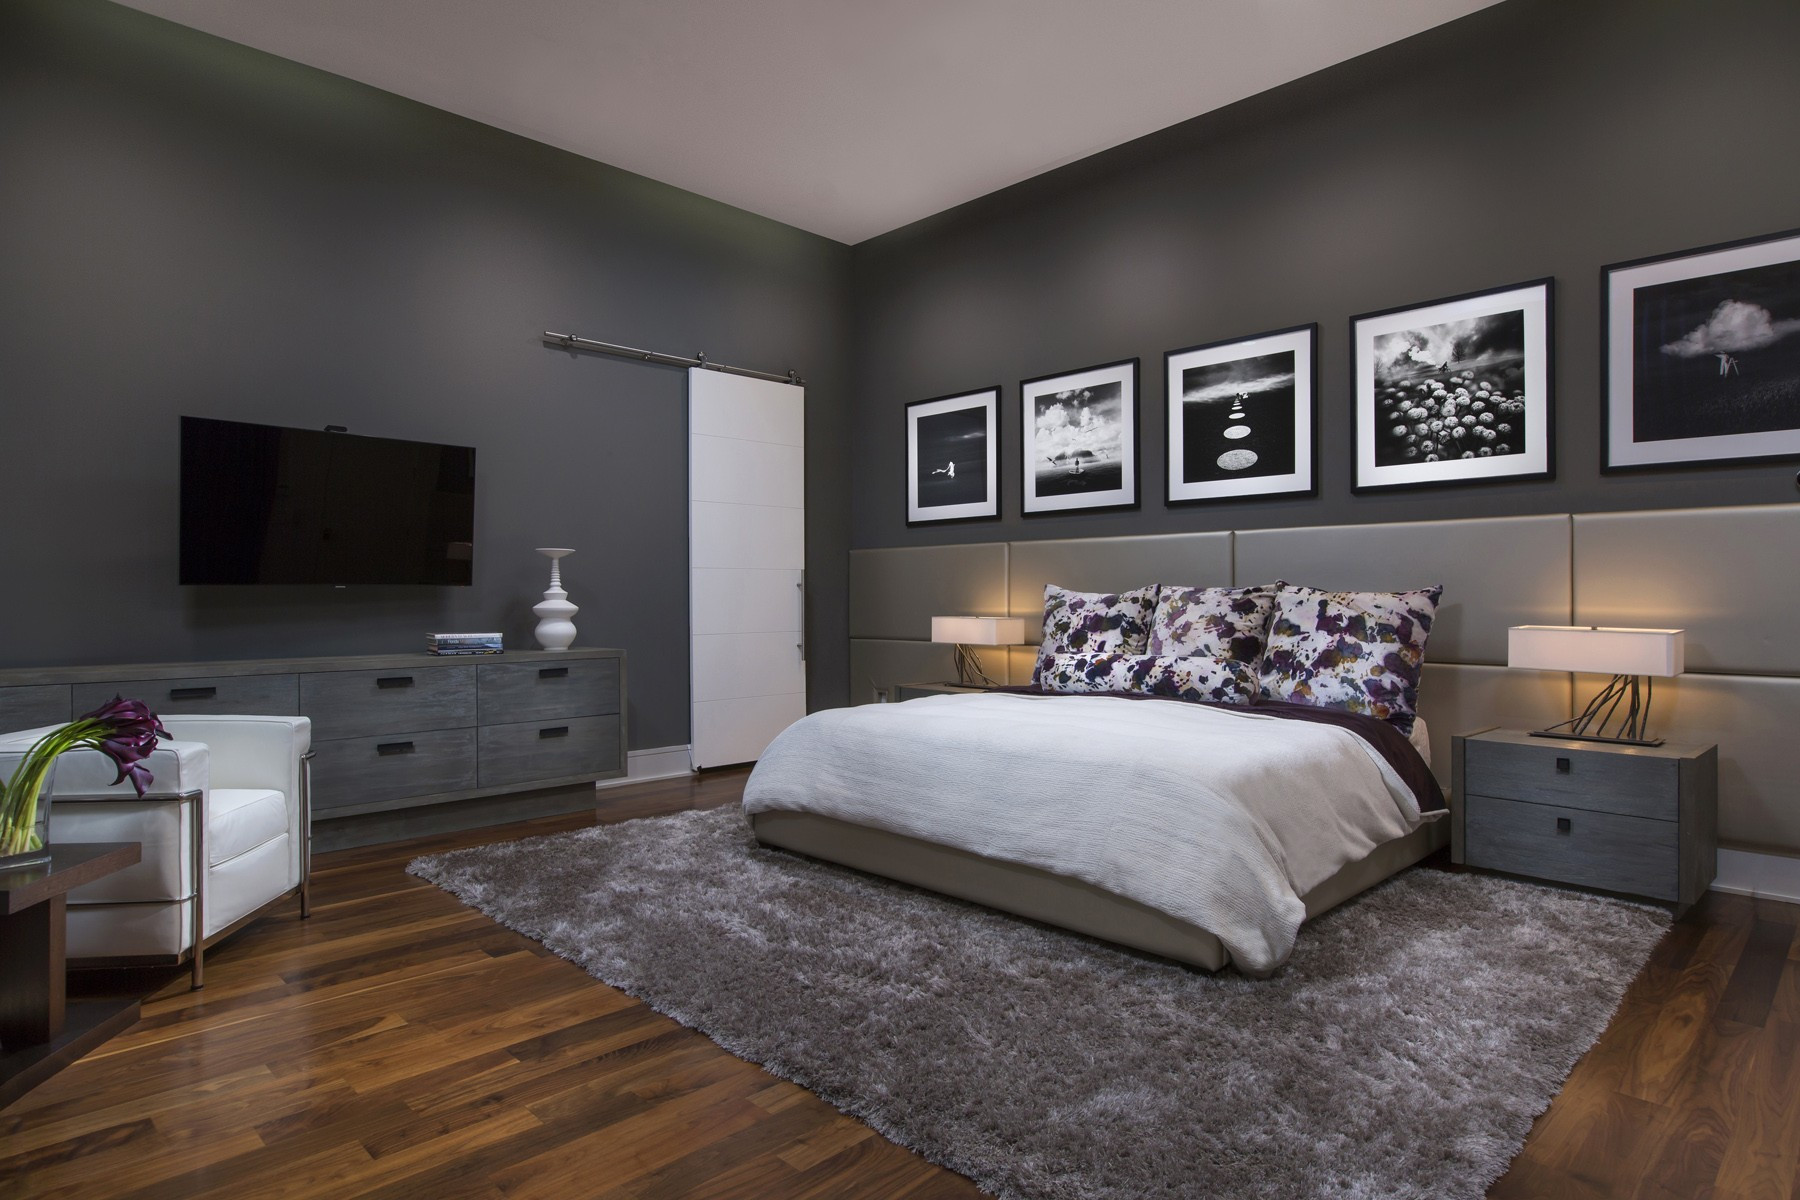 Trending Paint Colors For Bedrooms
 Modern Interior Paint Trends For 2018